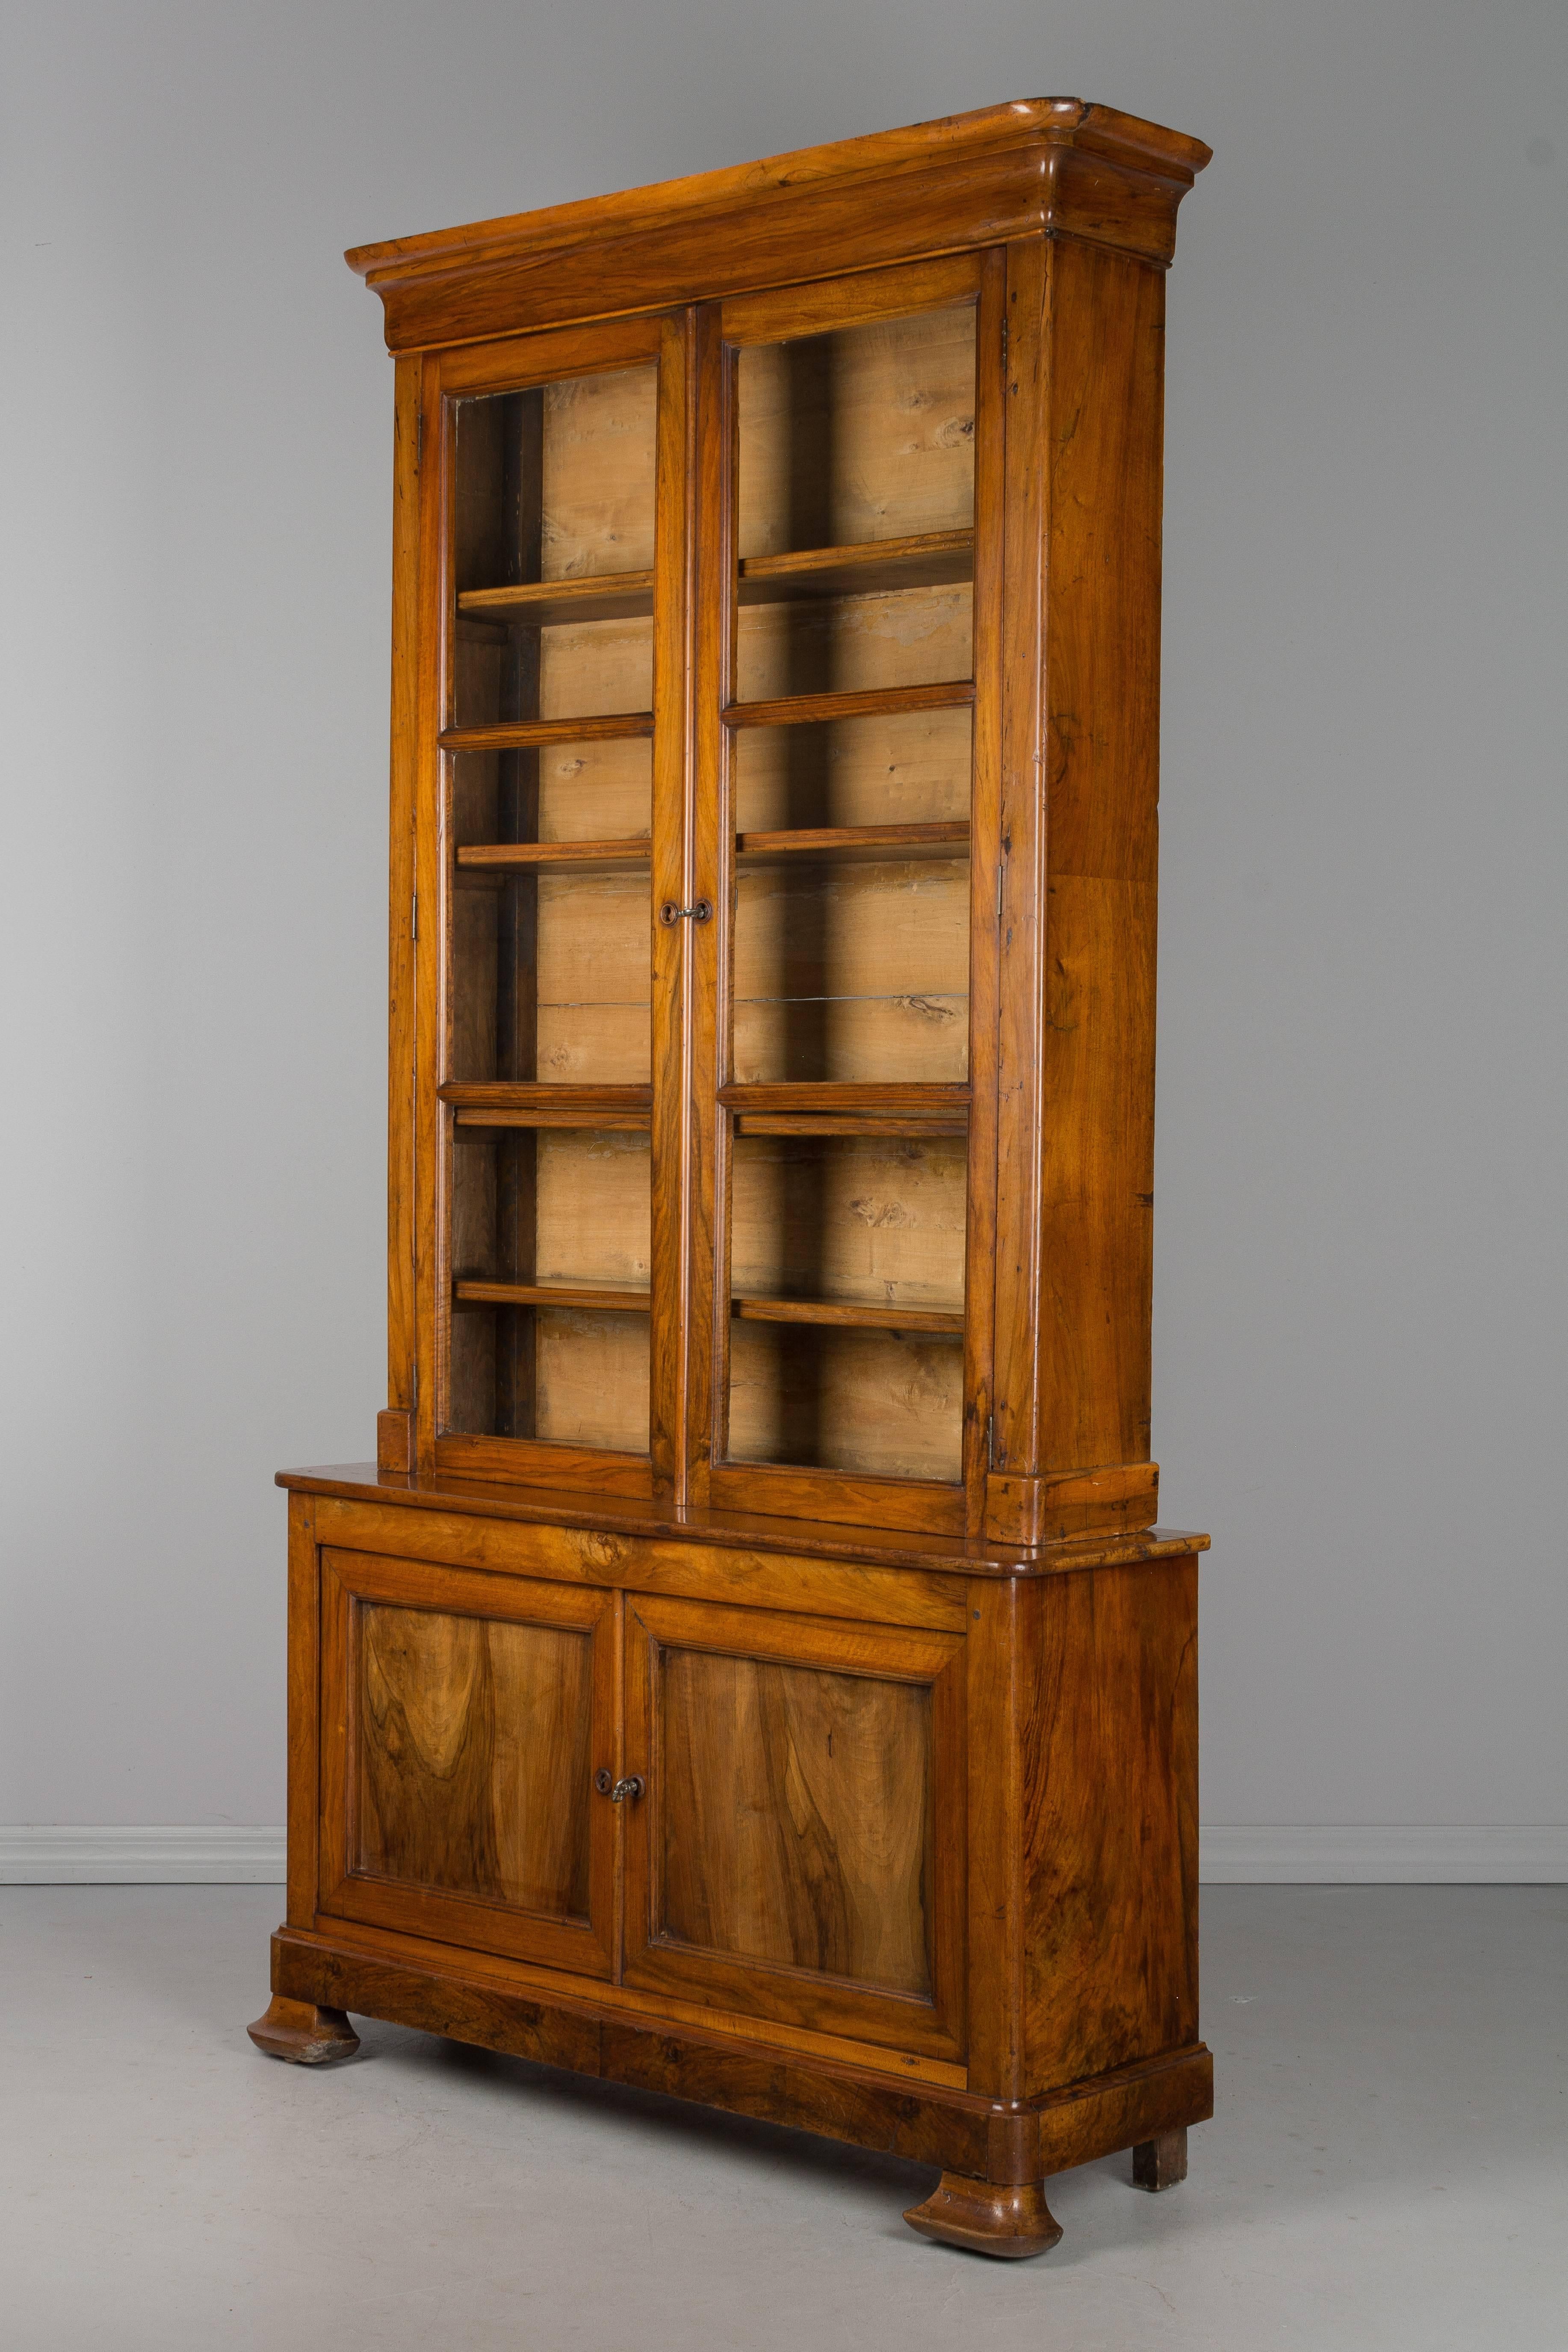 A 19th century French Louis Philippe bibliotheque made of solid walnut. The upper book case has the original paned glass doors and opens to four fixed shelves with an inside depth of 7